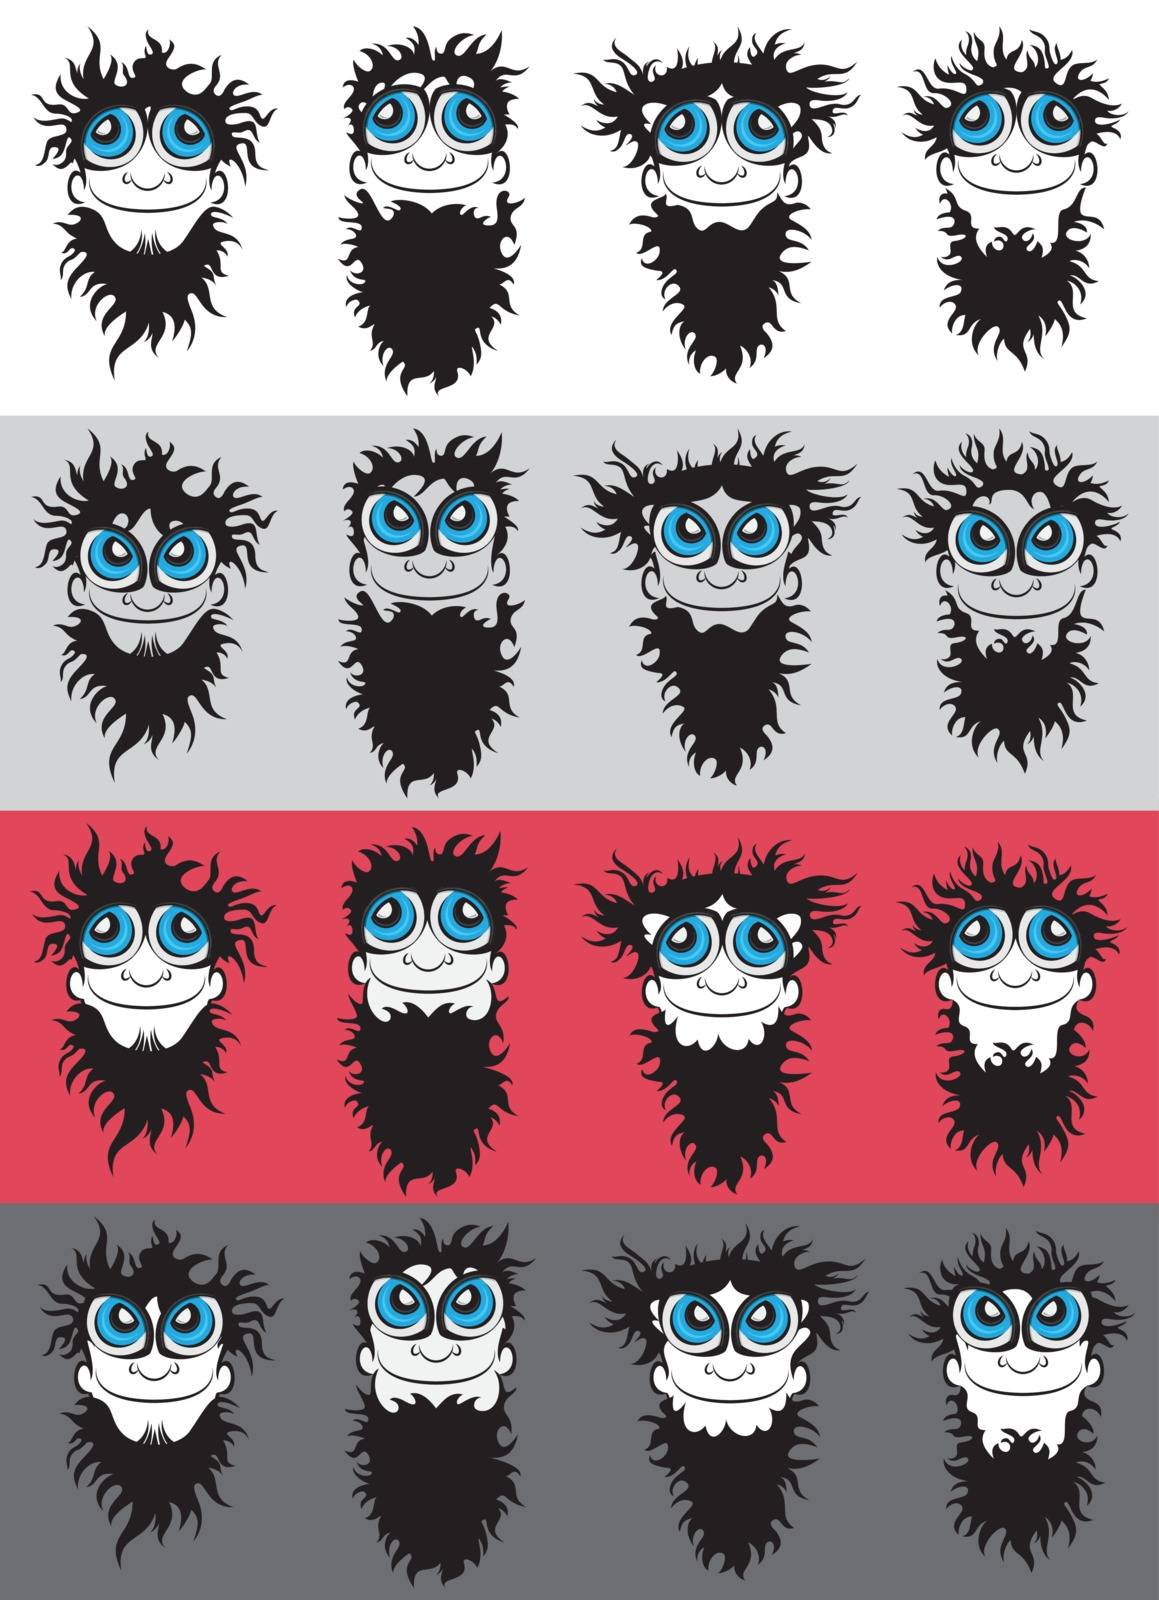 smiling hairy bearded hipster guy face portrait vector illustration by Zuzuan